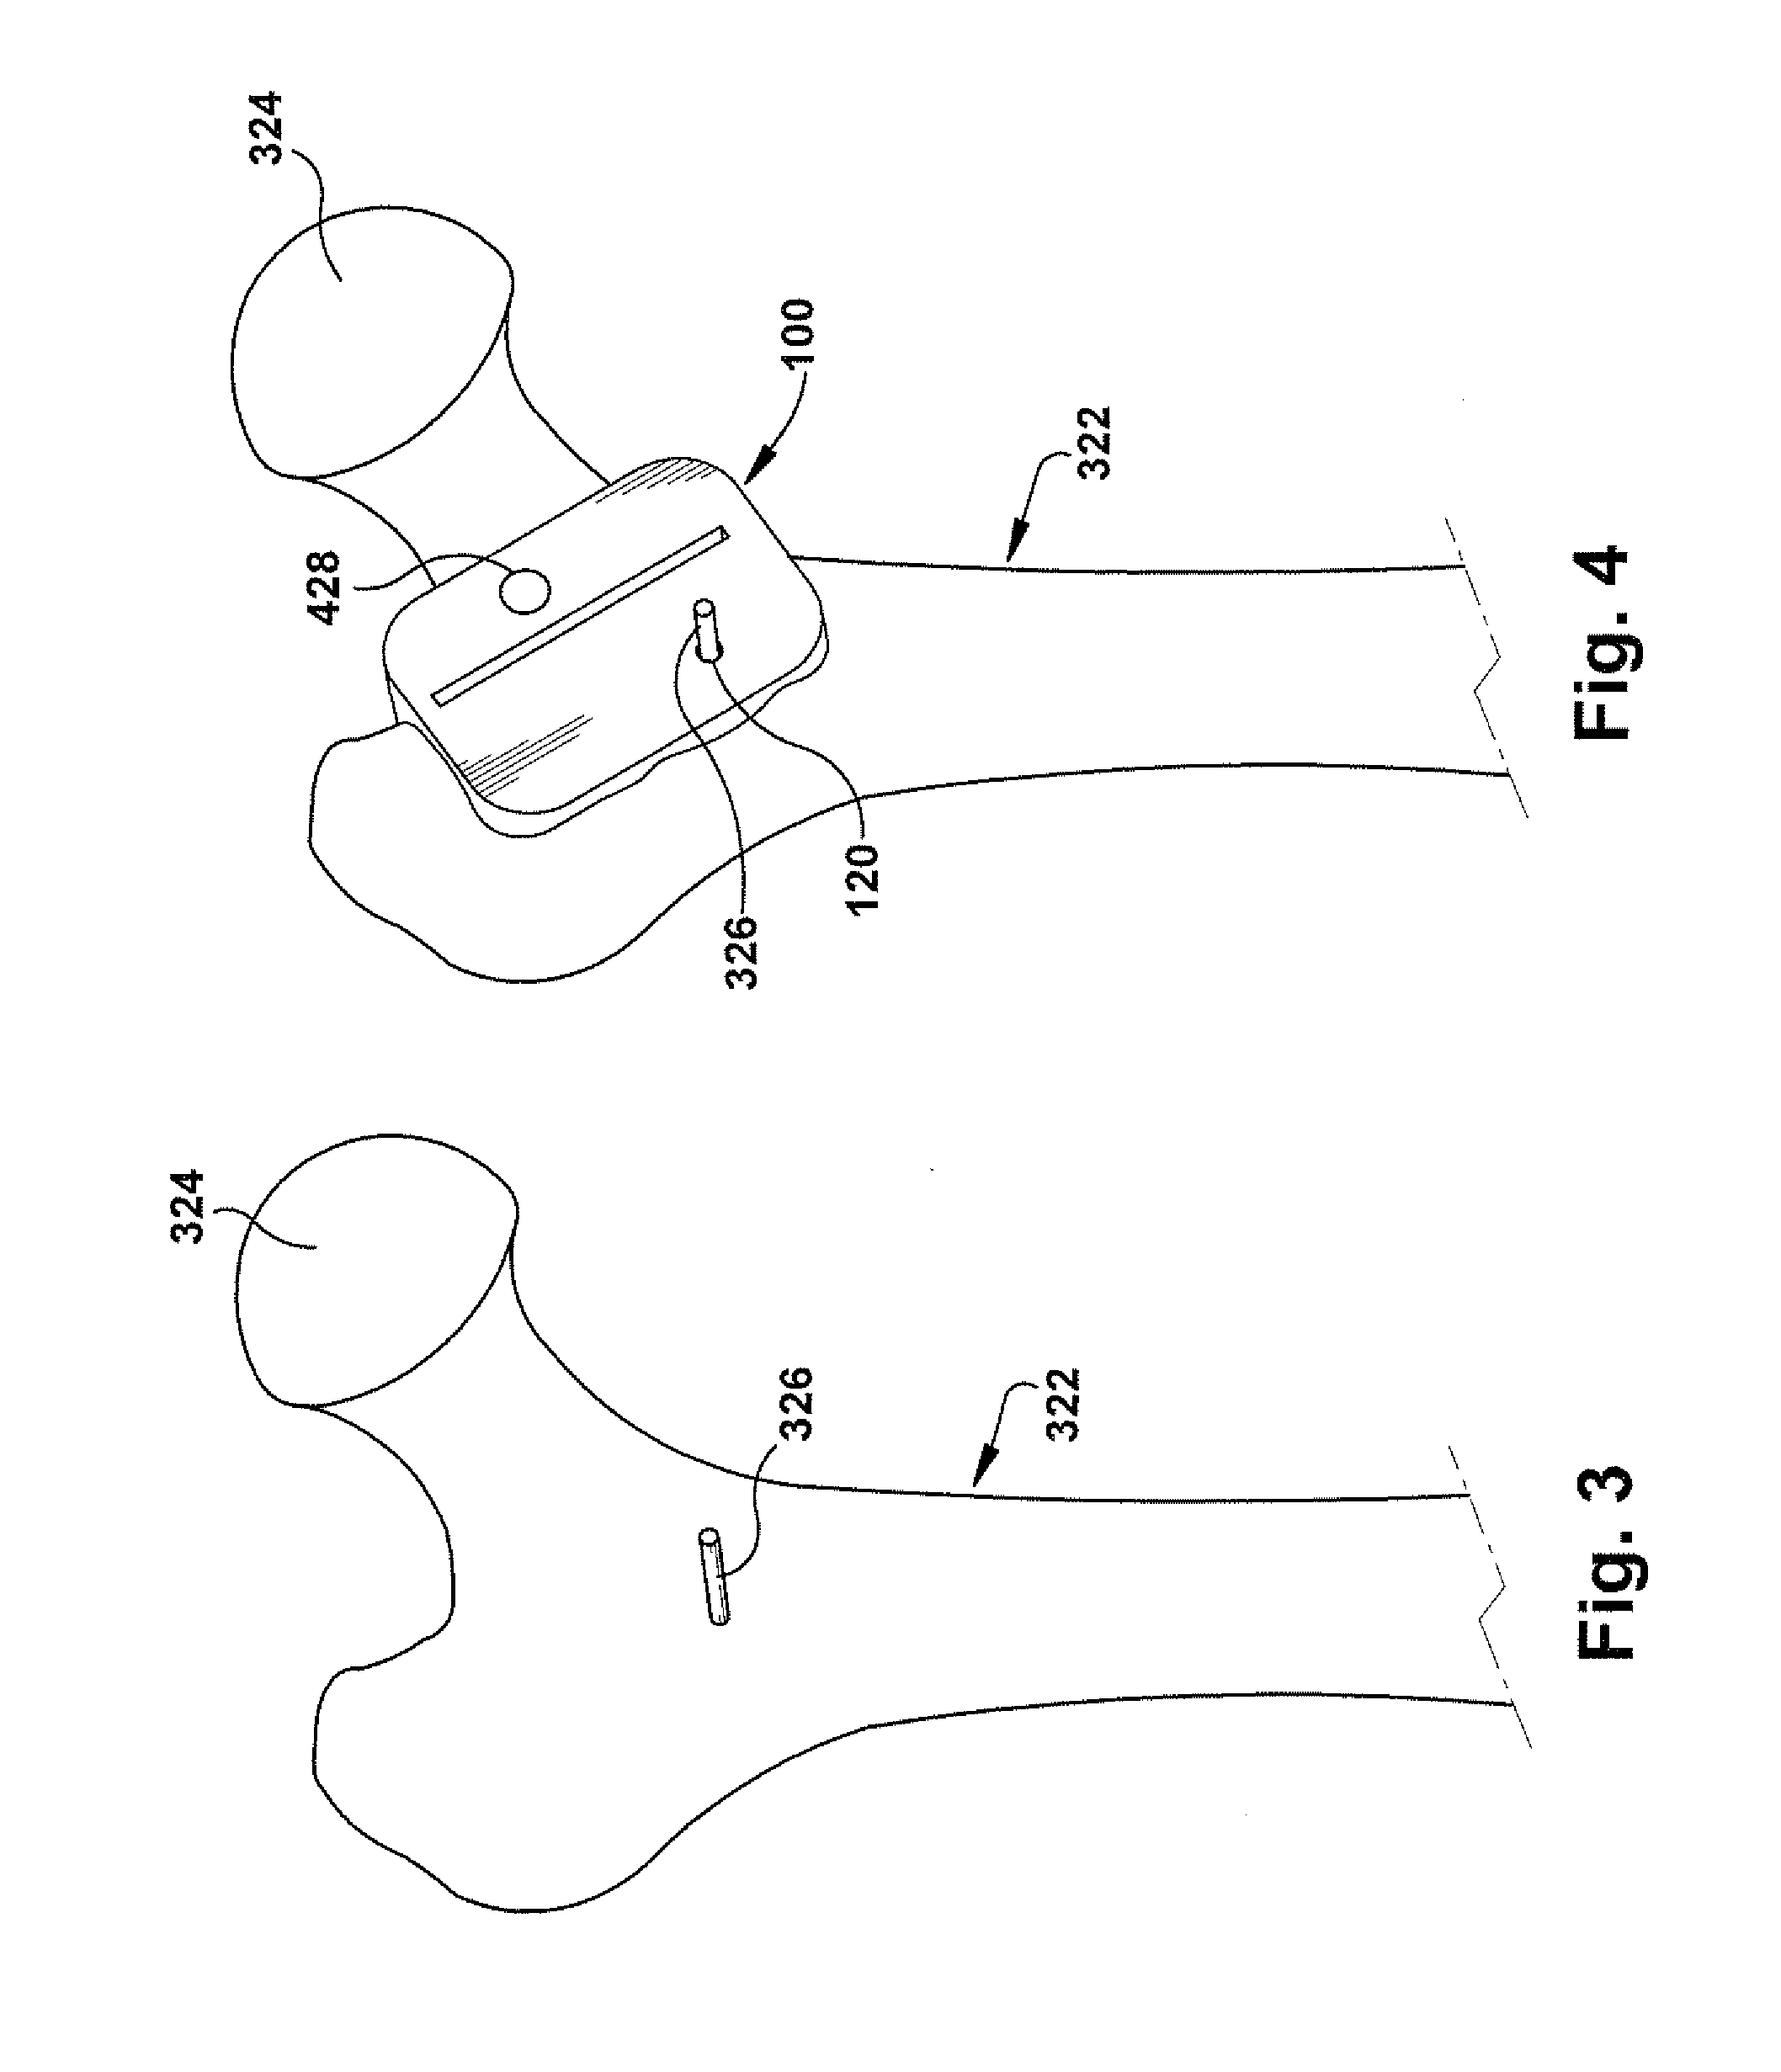 Positioning apparatus and method for a prosthetic implant